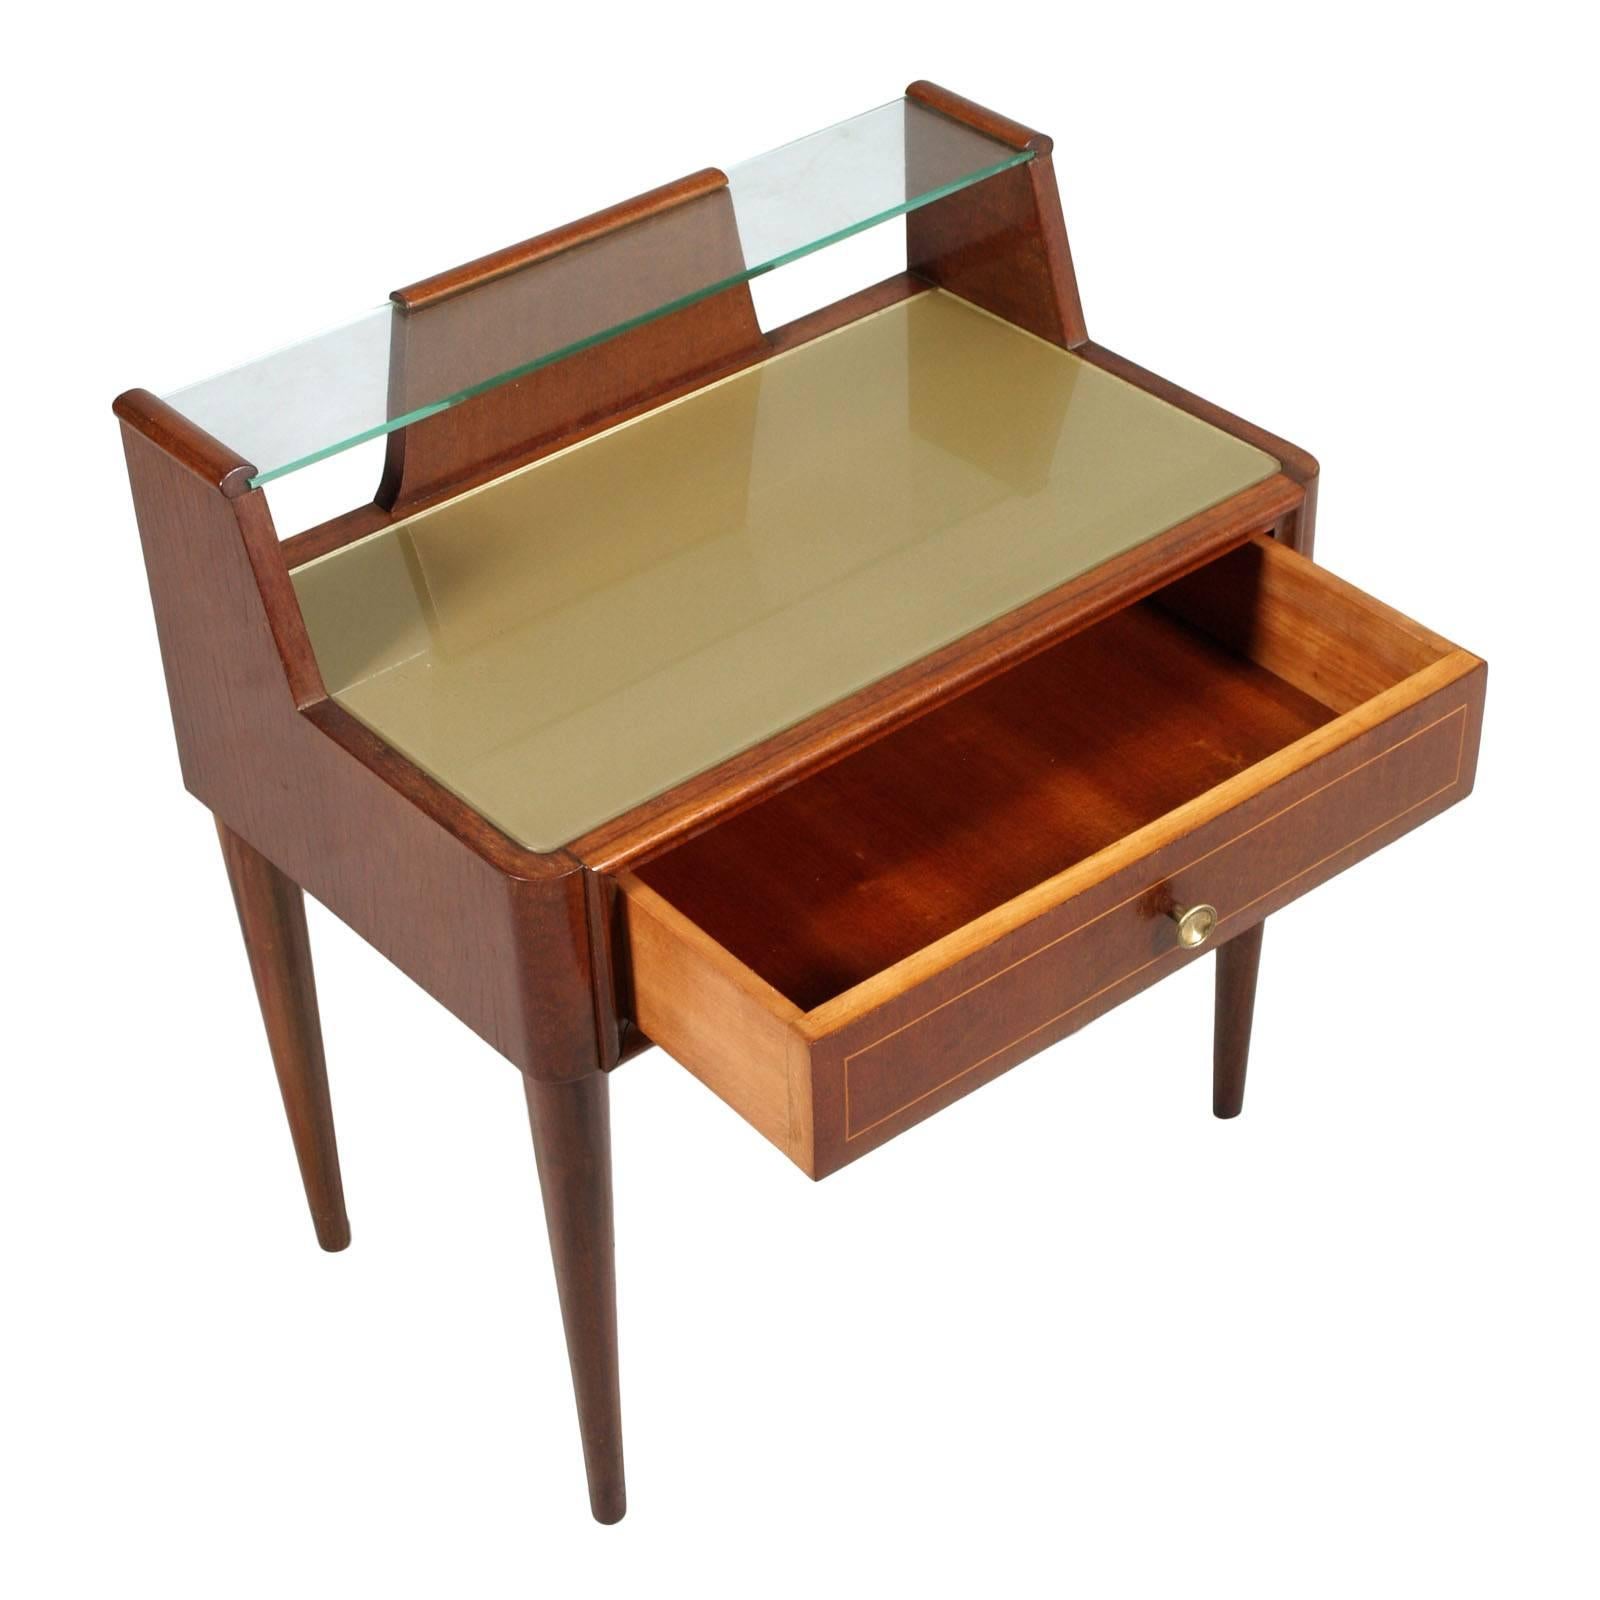 Italian 1940s Gio Ponti style nightstand in walnut, with double crystal tops, one transparent one lacquered, wax polished

Measures cm: H 48/58 x W 55 x D 35

About Gio Ponti
 As a designer, Gio Ponti worked for 120 companies. As an architect,